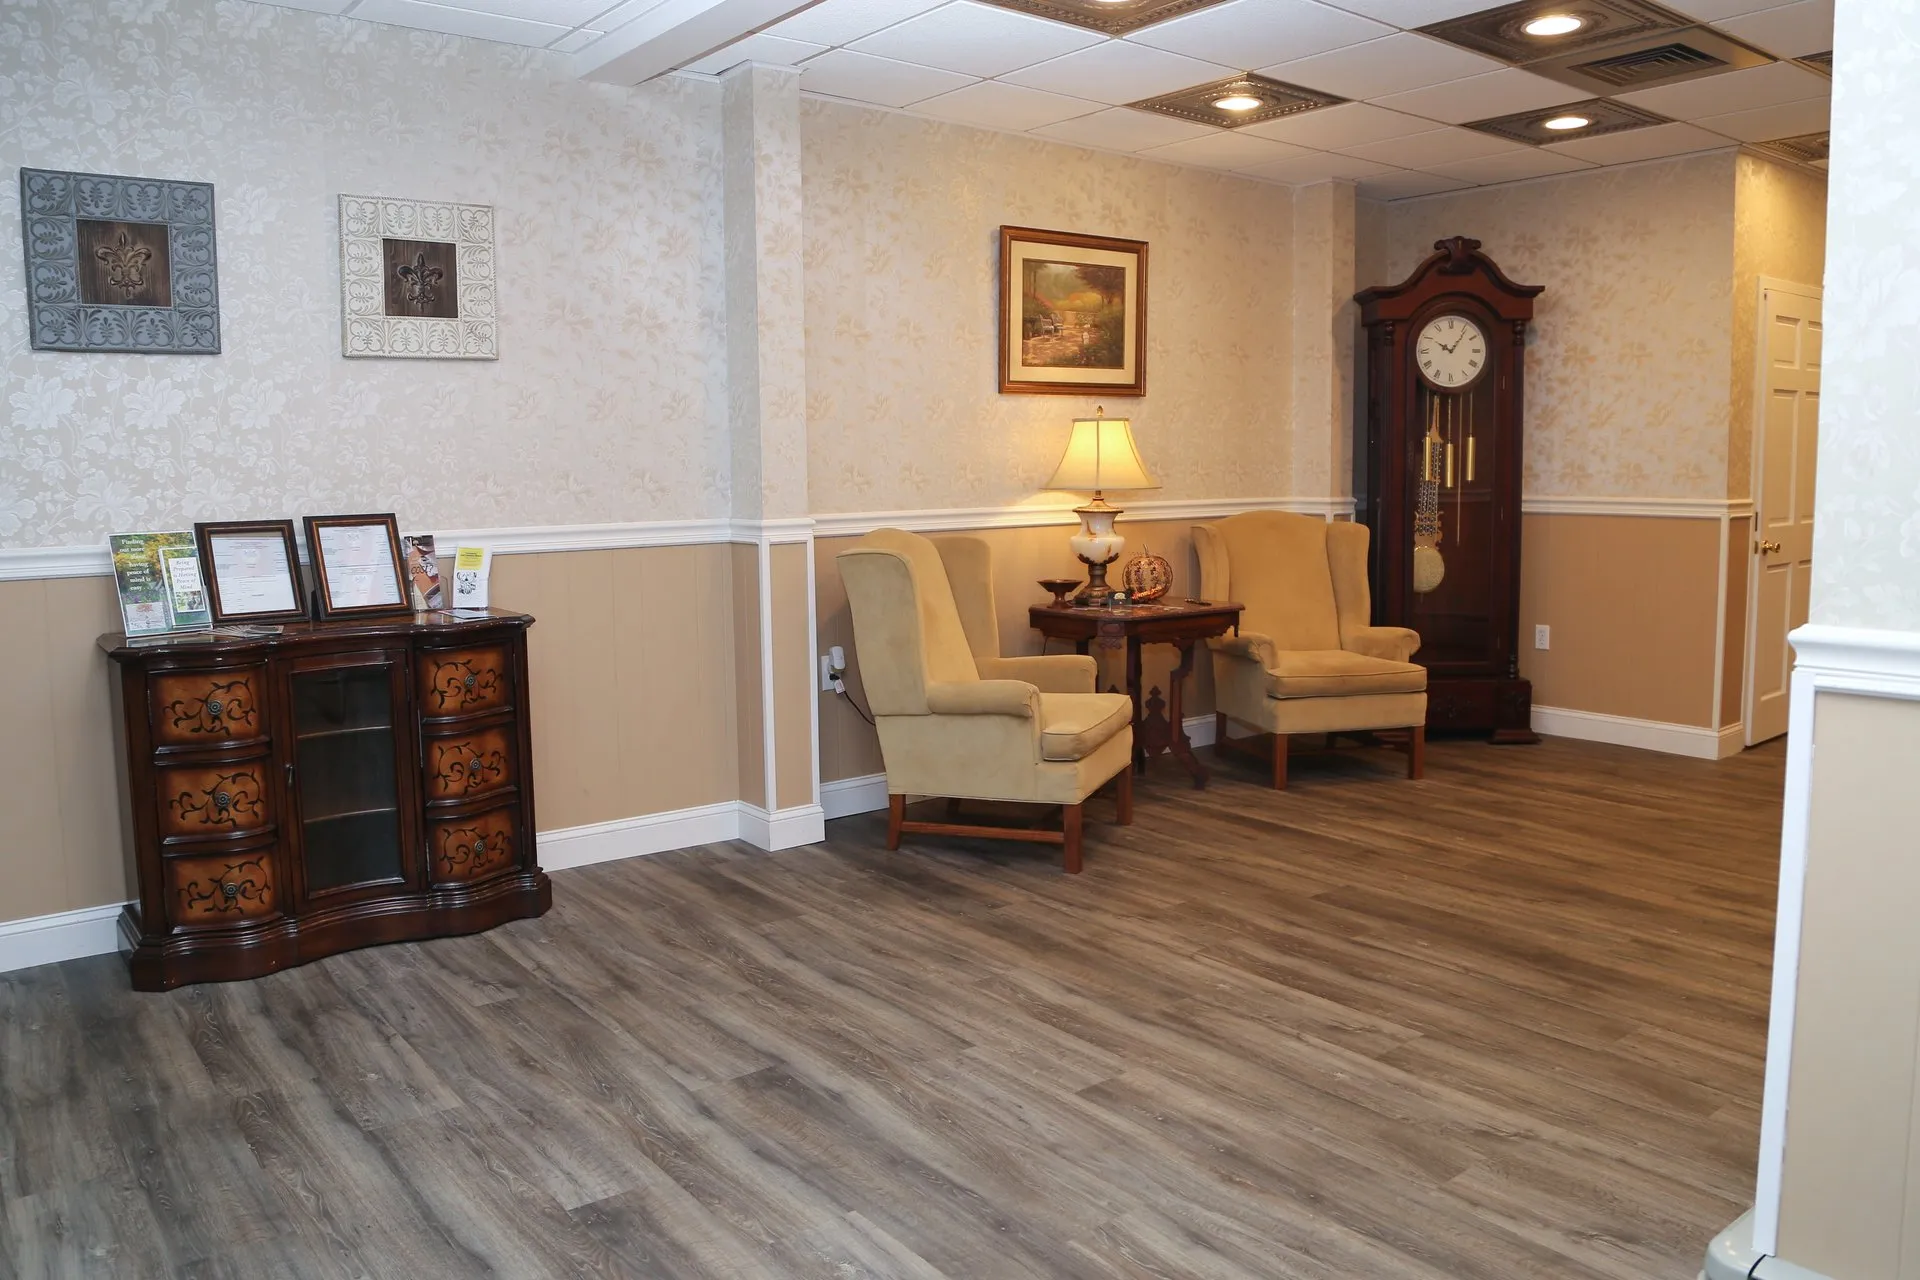 funeral home facilities room with two large chairs and a big clock at the corner